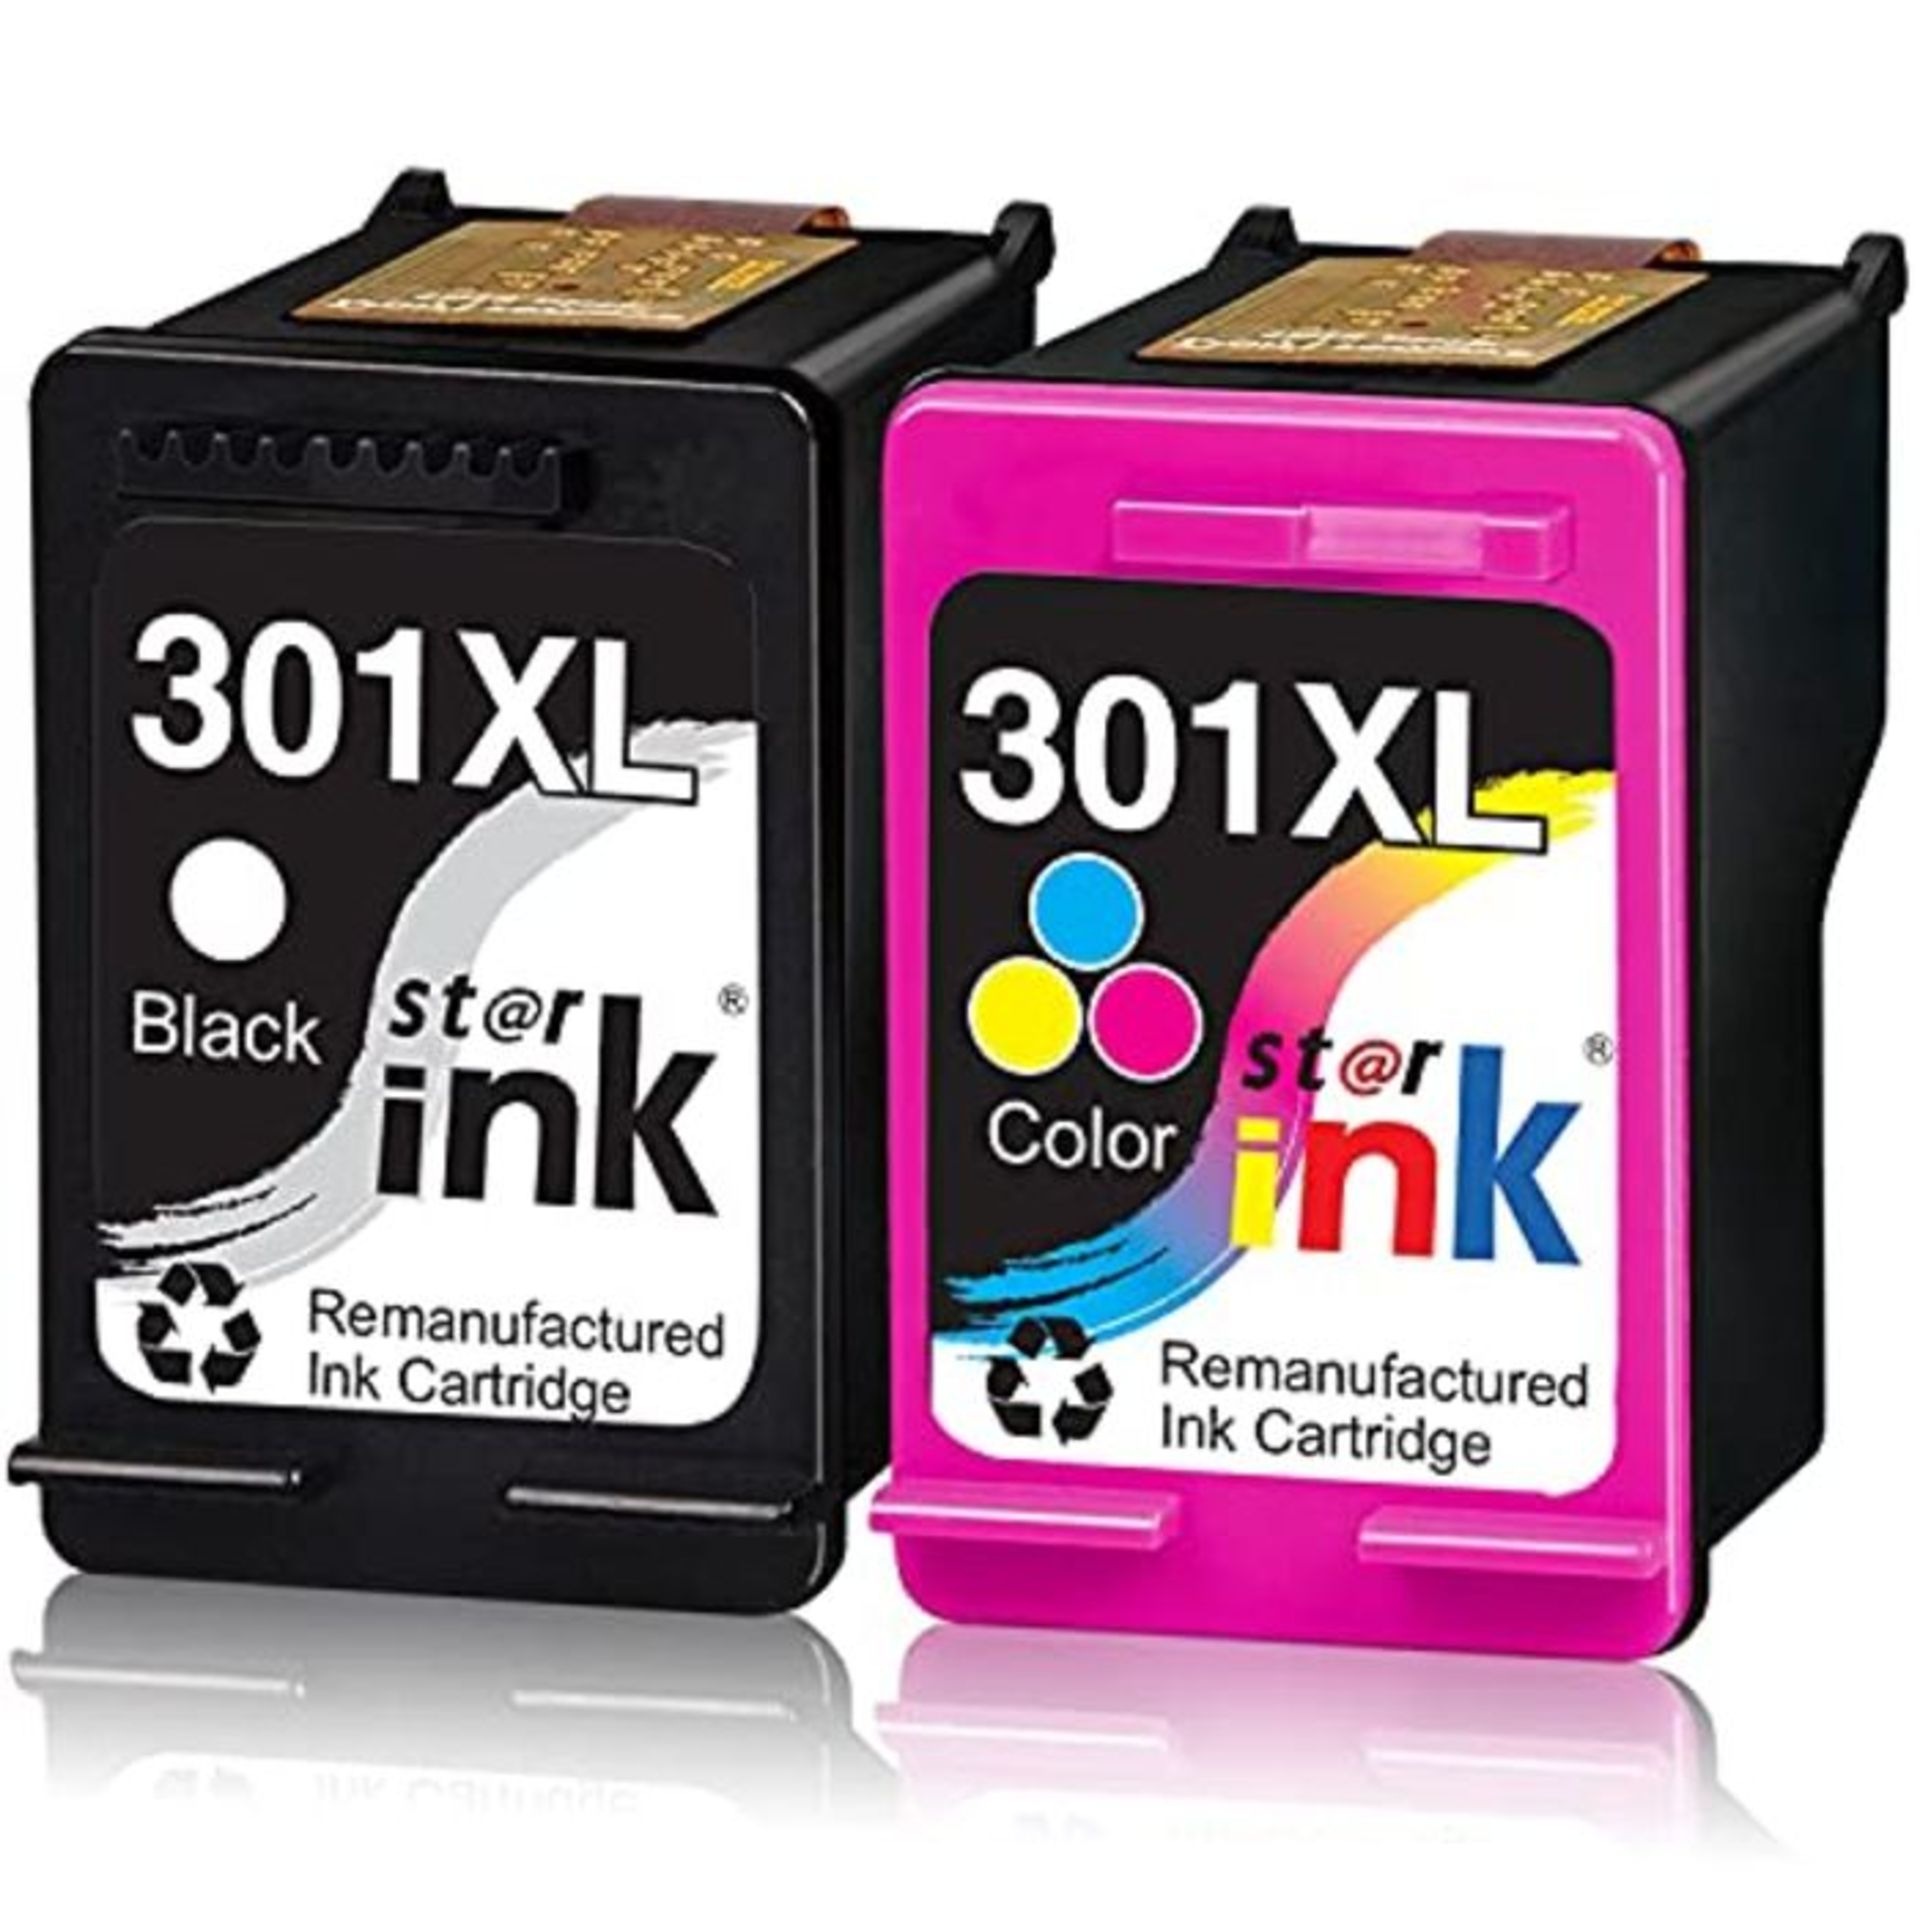 Starink Remanufactured Printer Cartridges Compatible with HP 301XL 301 XL for HP DeskJ